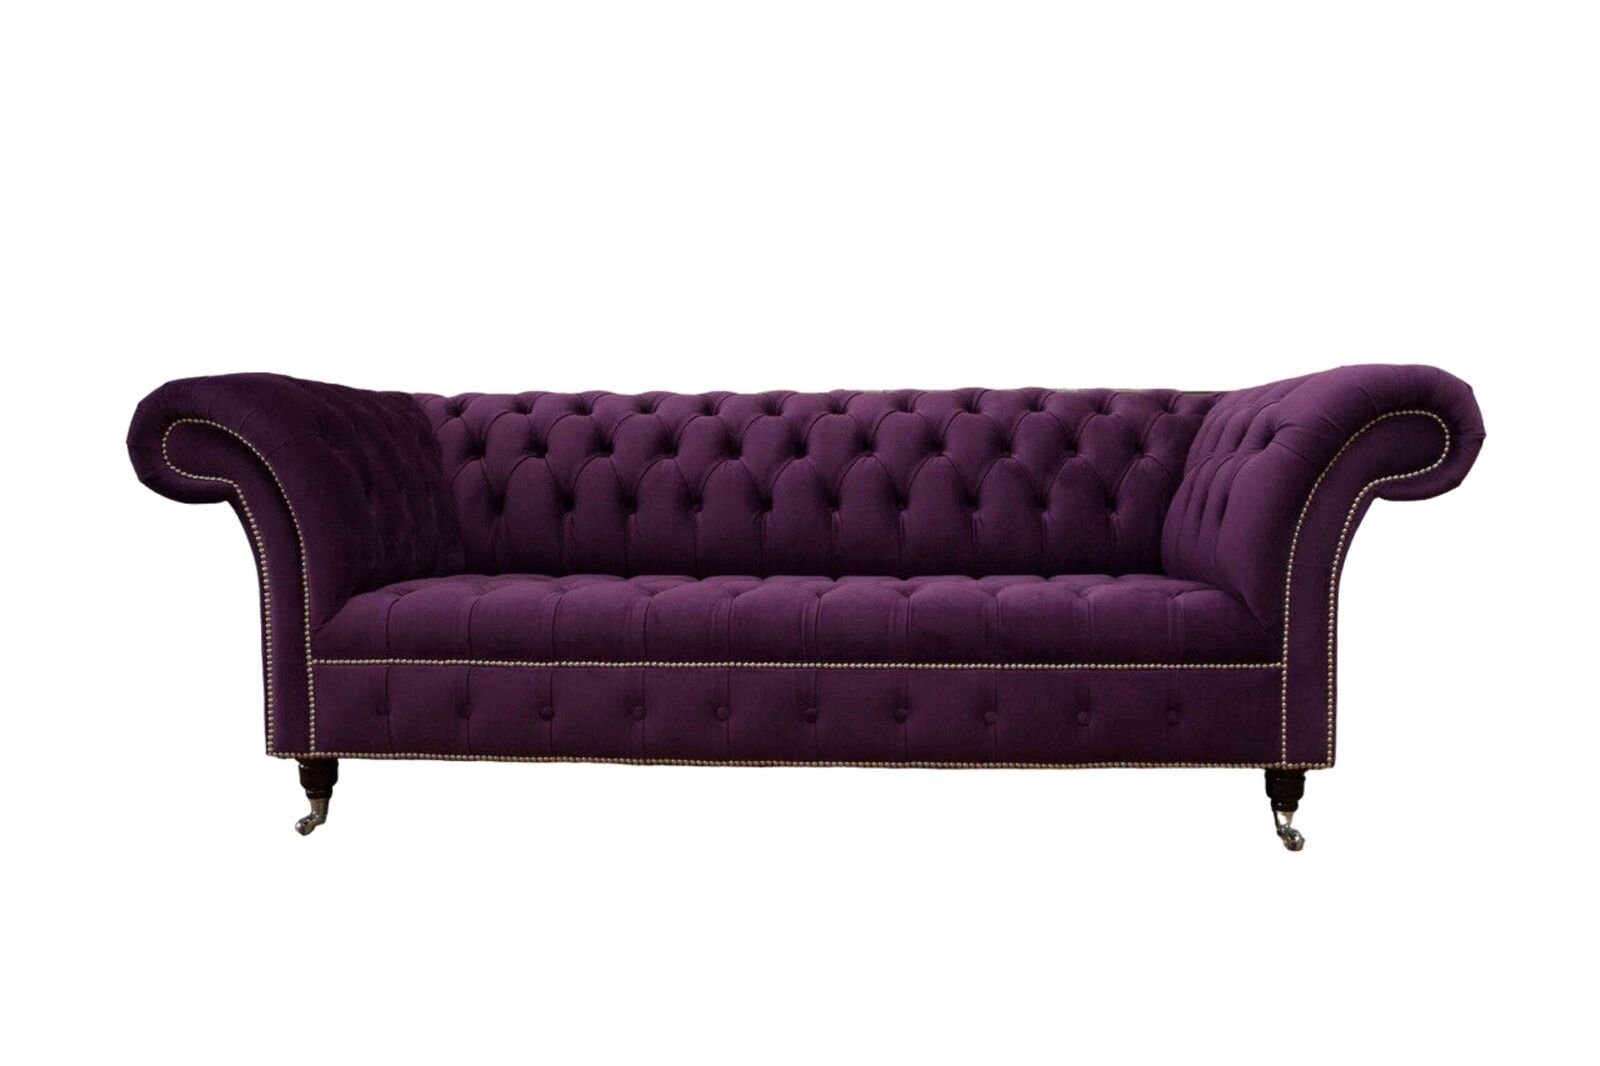 JVmoebel Sofa Lila Chesterfield Sofa 3 Sitzer Chesterfield Designer Couch Textil, Made In Europe